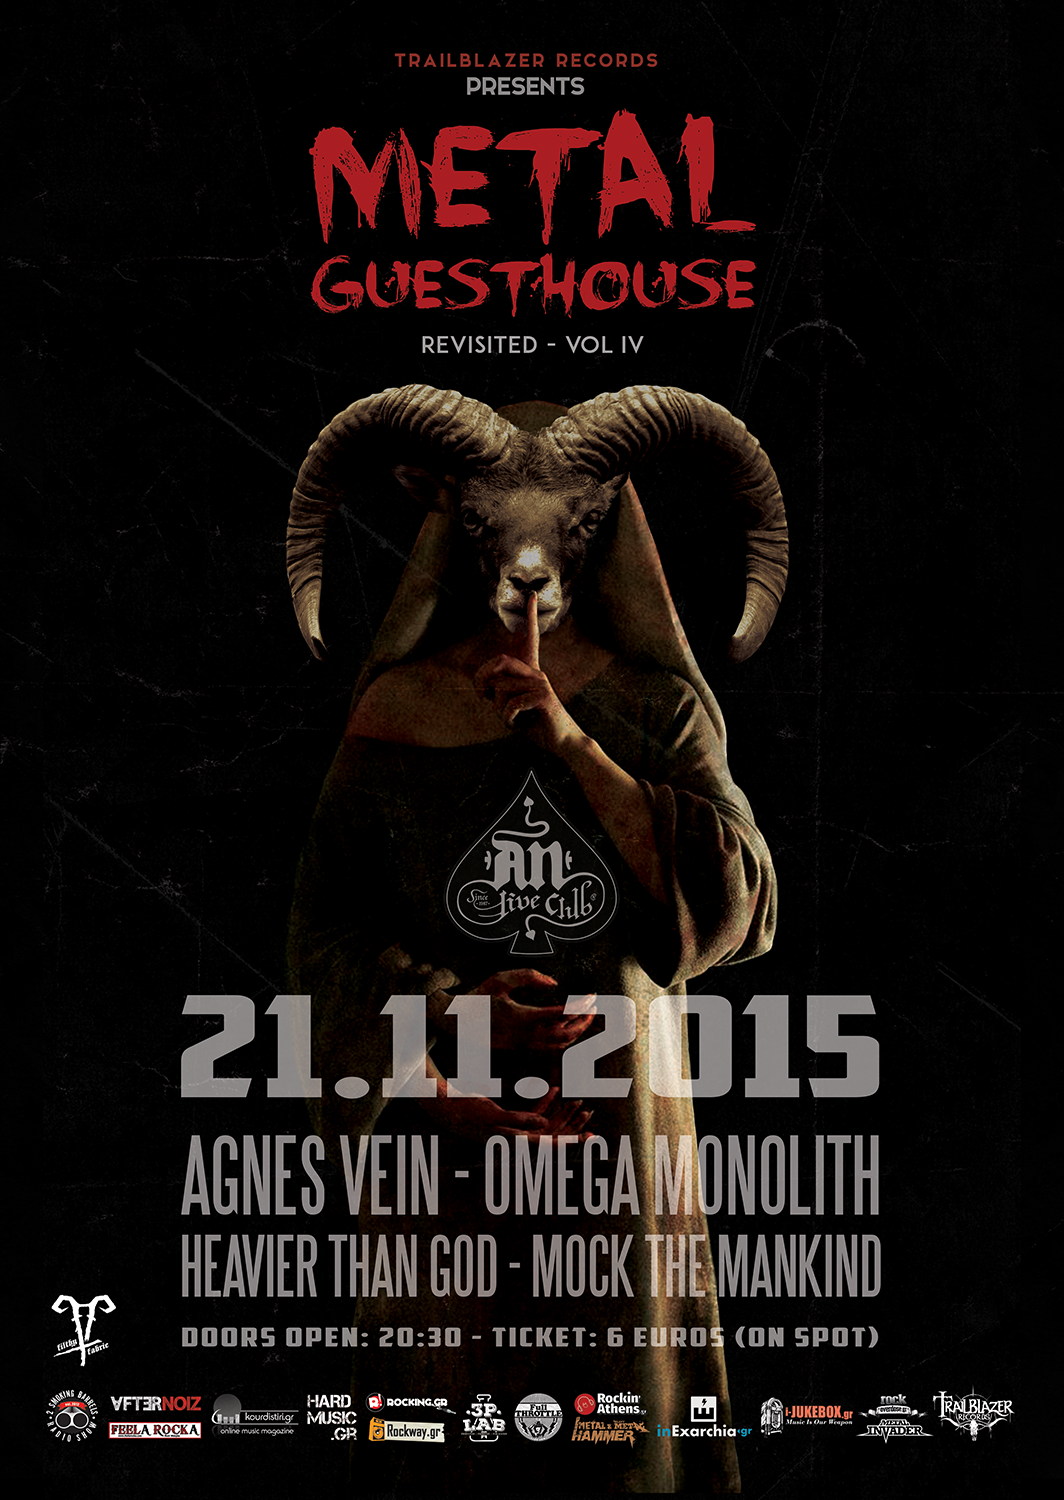 21.11.2015 – Metal Guesthouse (revisited) vol. IV